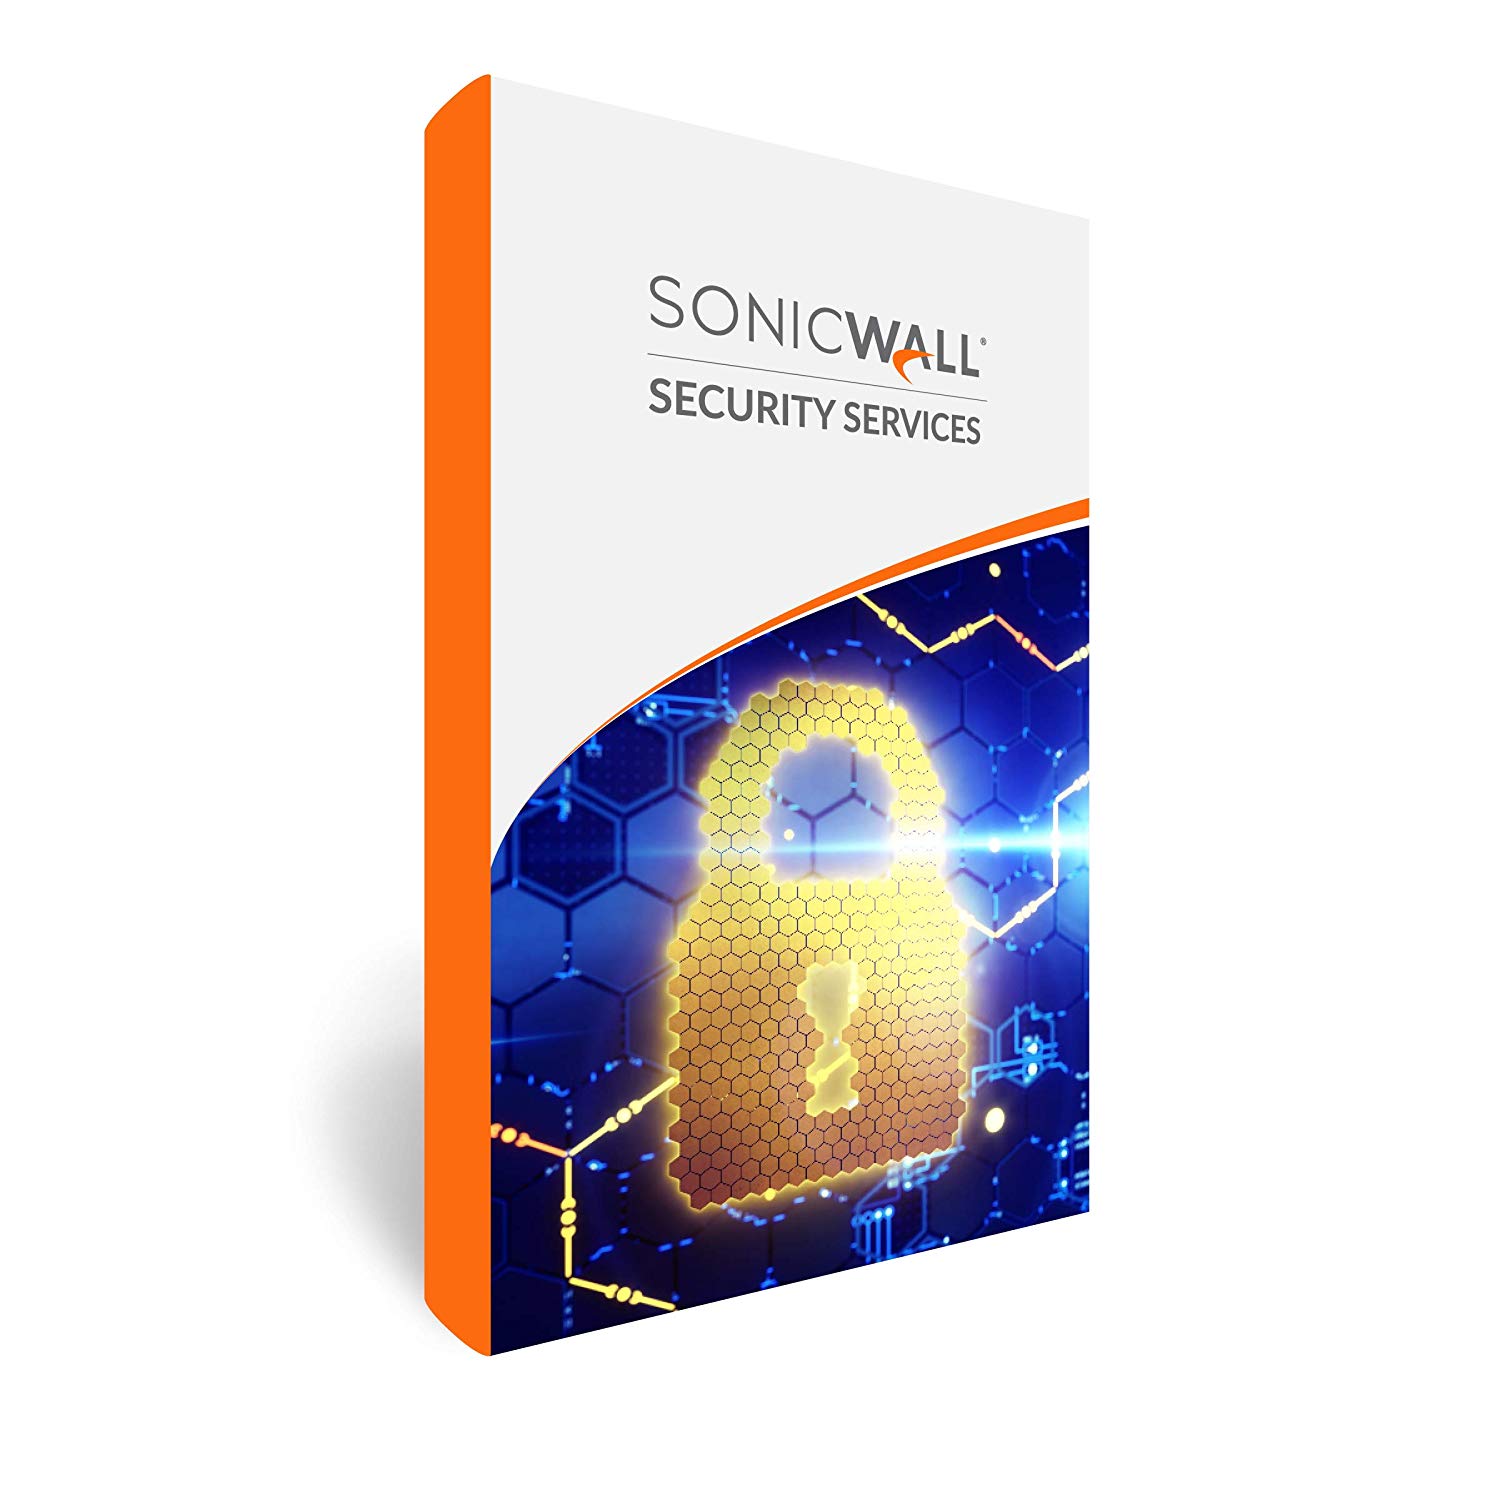 SonicWall TZ600 3YR 24x7 Support 01-SSC-0248 - image 1 of 3